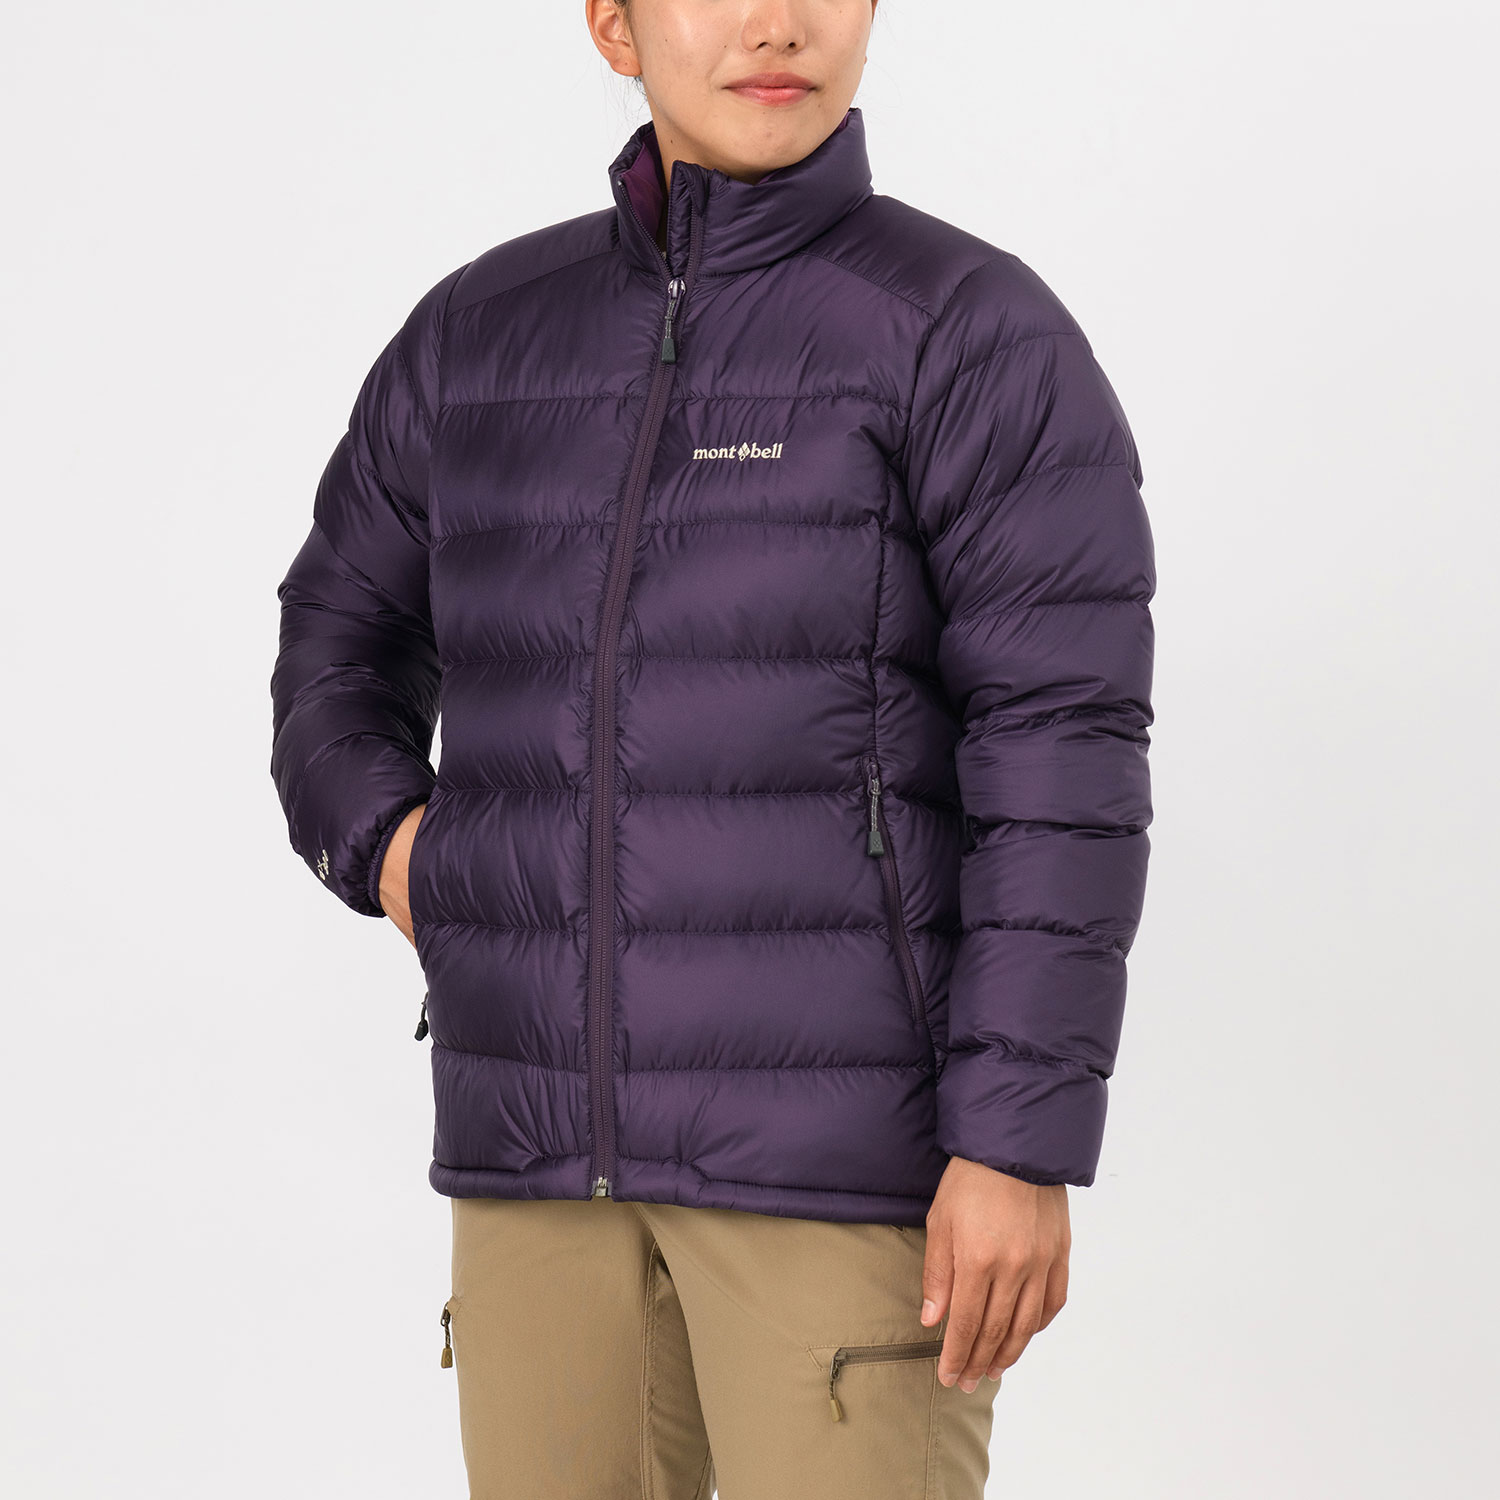 Unlock Wilderness' choice in the Montbell Vs North Face comparison, the Alpine Light Down Jacket by Montbell